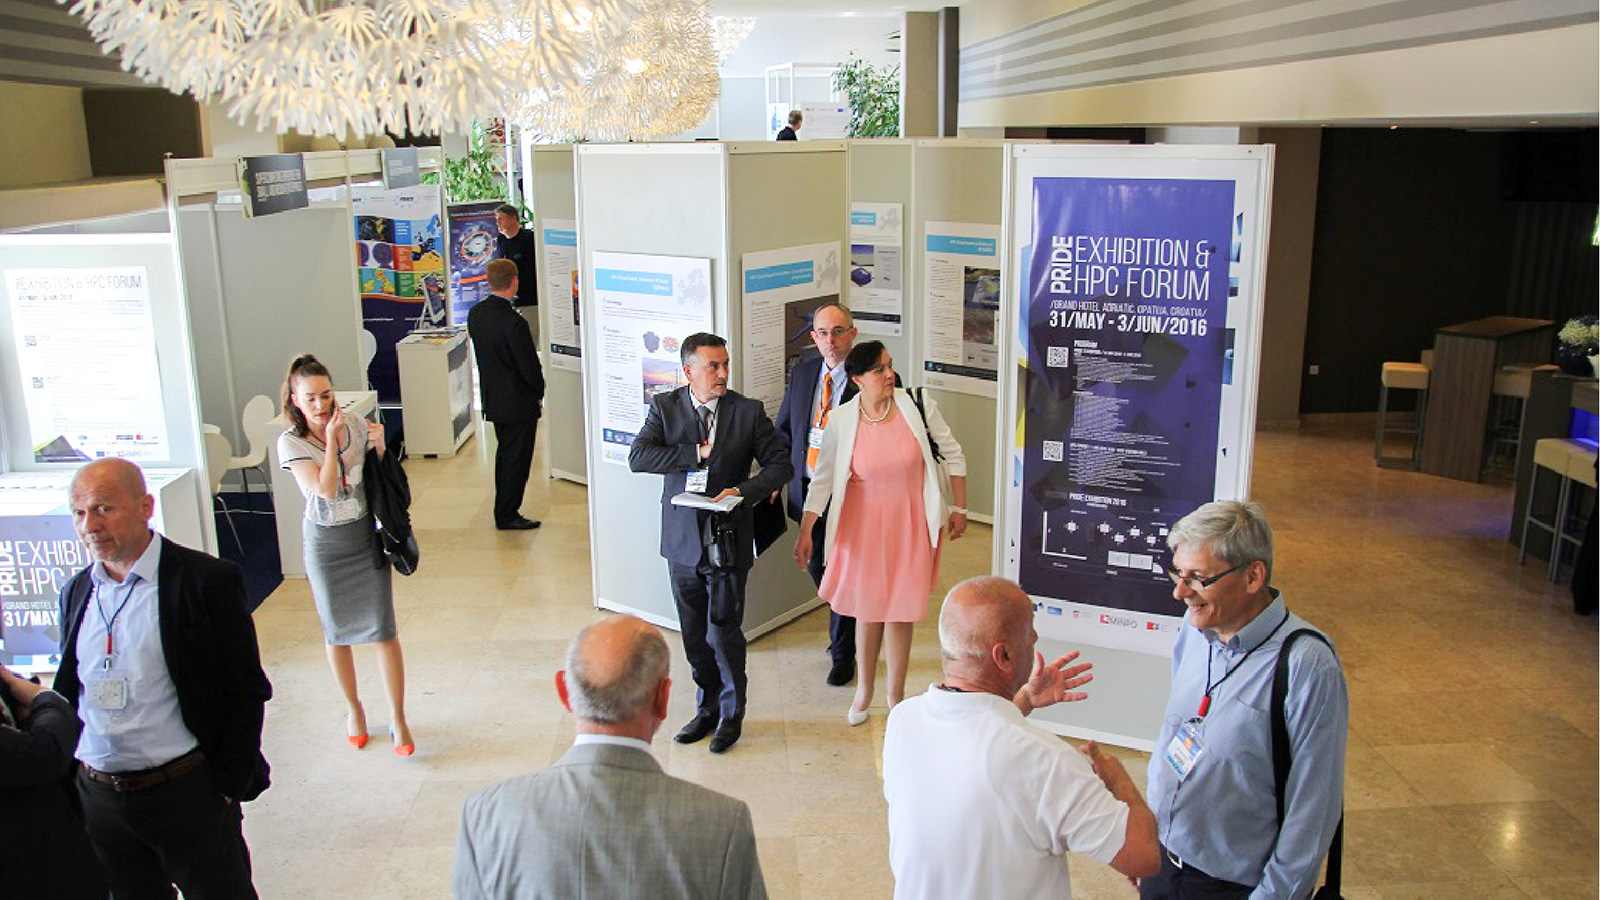 PRIDE Exhibition and HPC for SME Forum